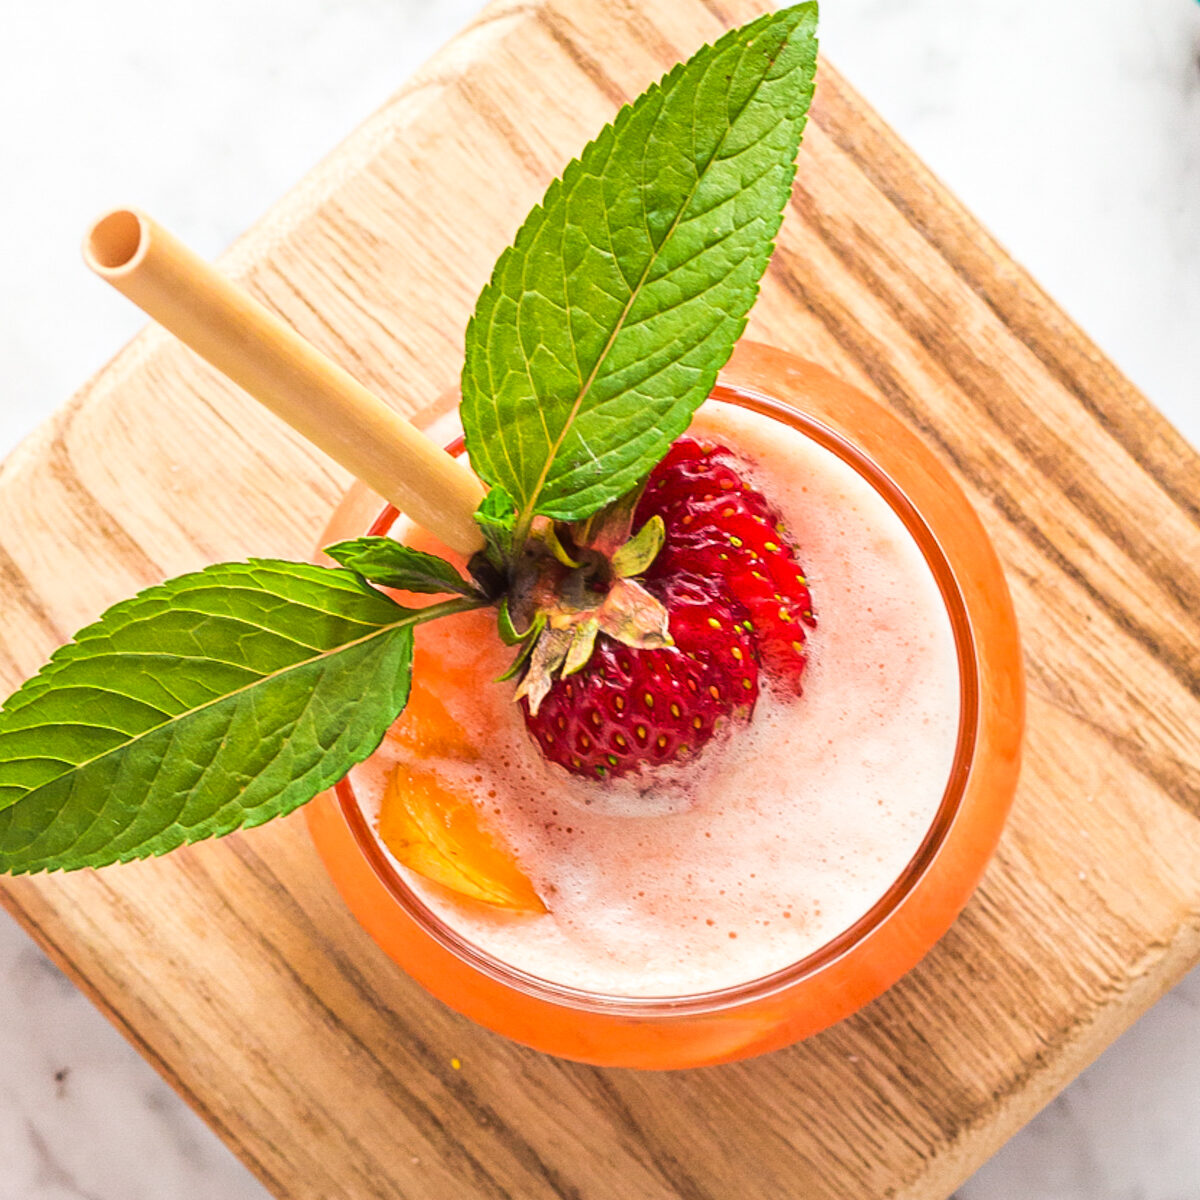 Looking down into the glass of frothy pink lemonade. There is a slice of peach, sliced strawberry, mint leaves and a gold straw sticking out. It's all on a small wooden board.